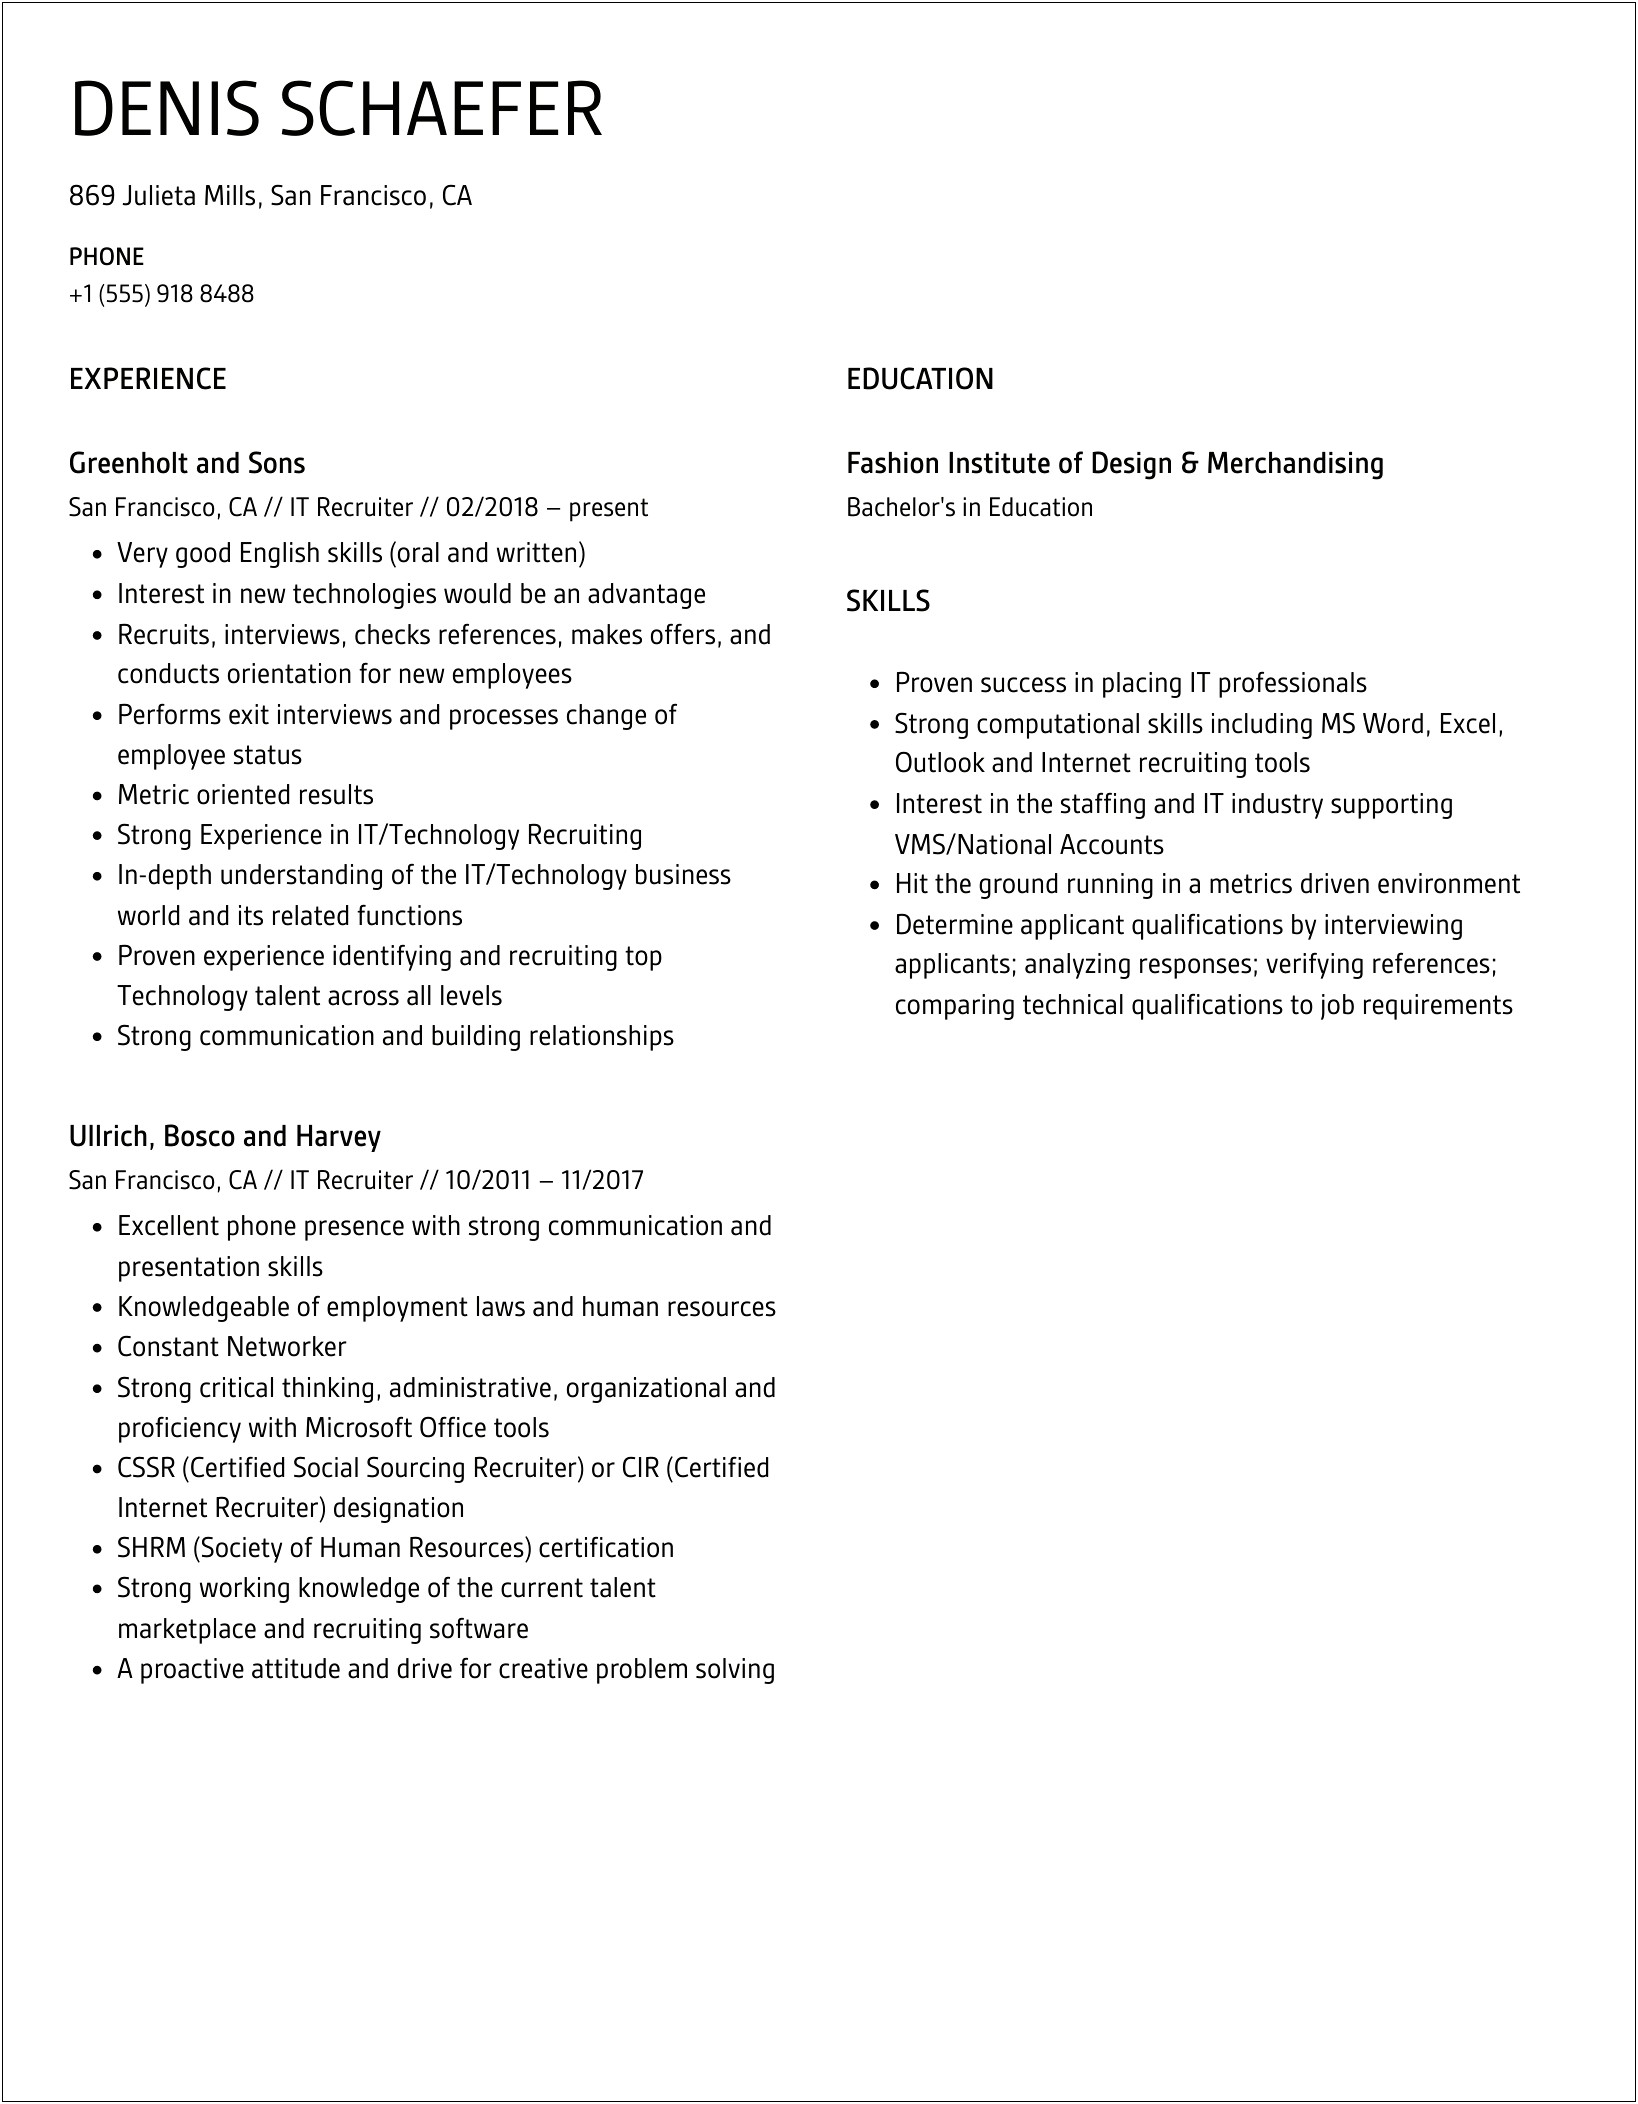 Email To Kelly Services Recruiter With Resume Sample